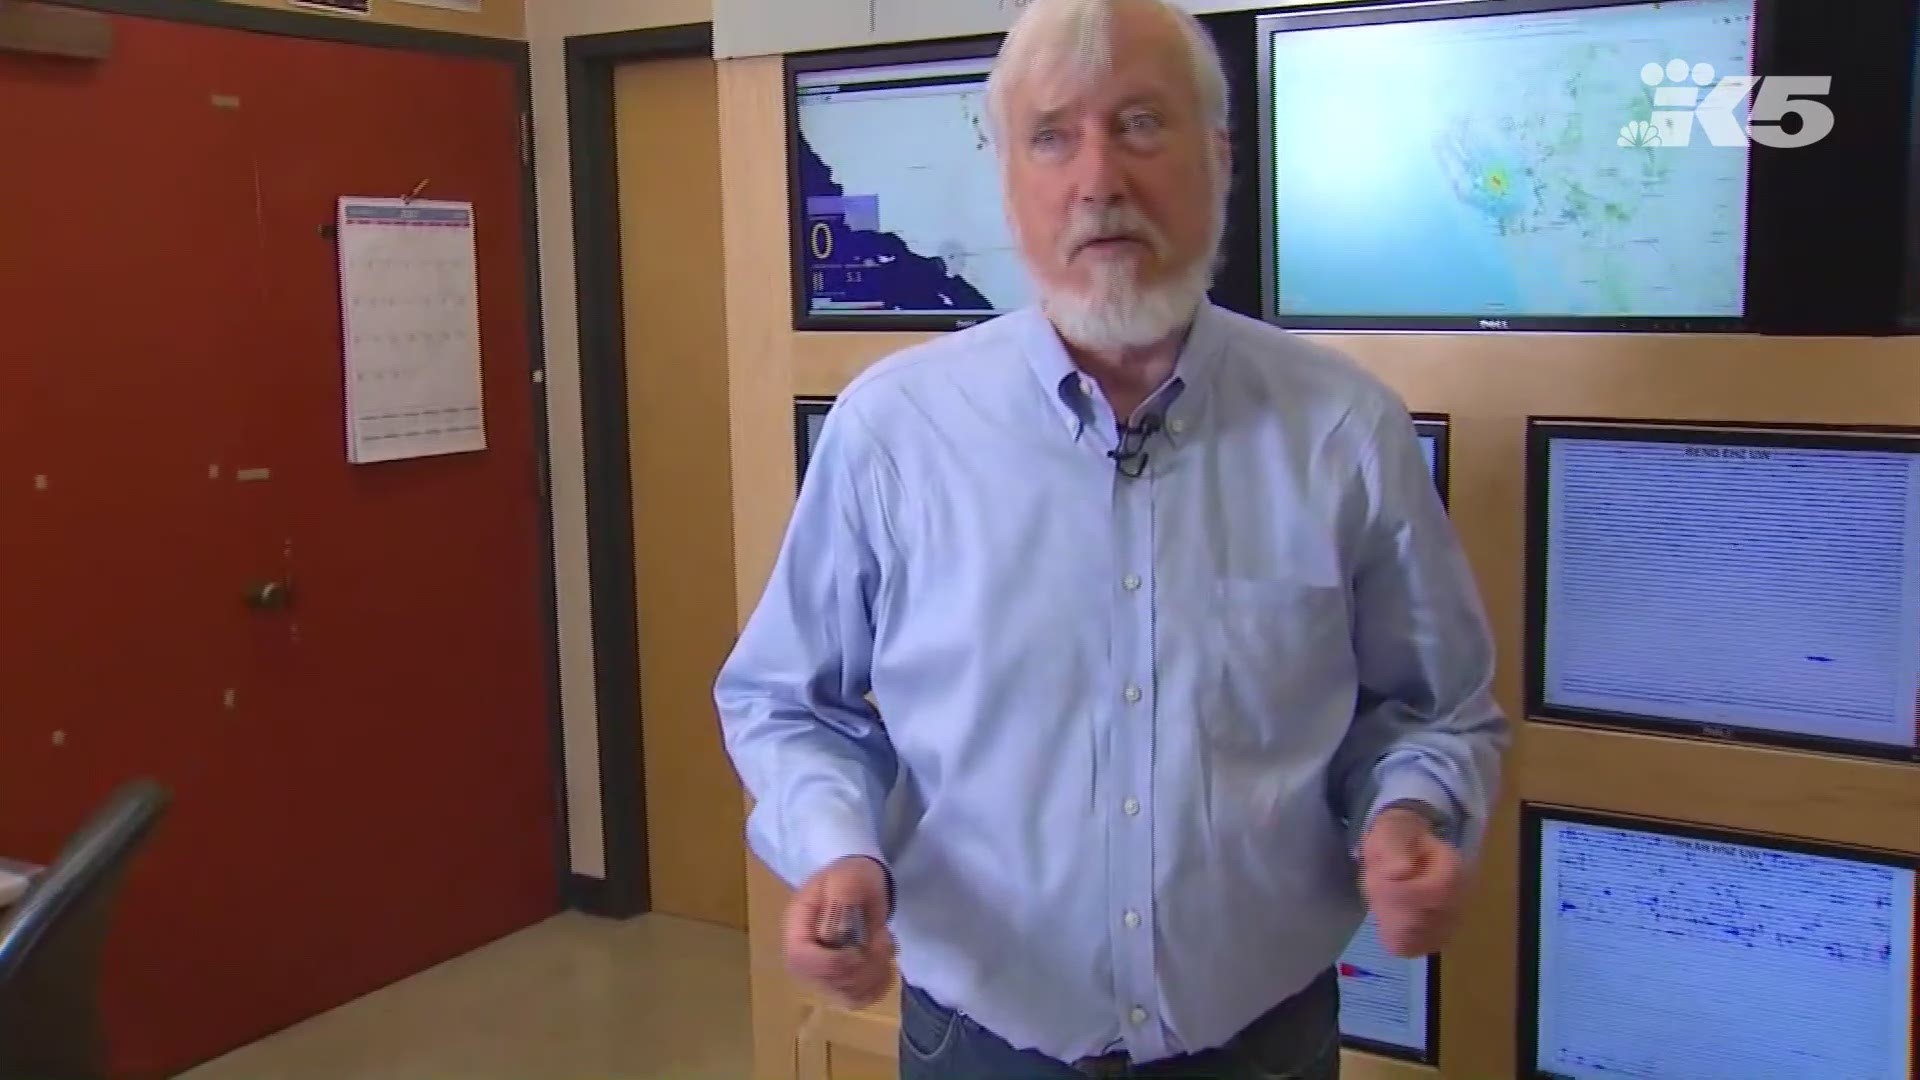 University of Washington Seismologist Bill Steele discusses the Monroe quake, early warning systems and what we can expect next.